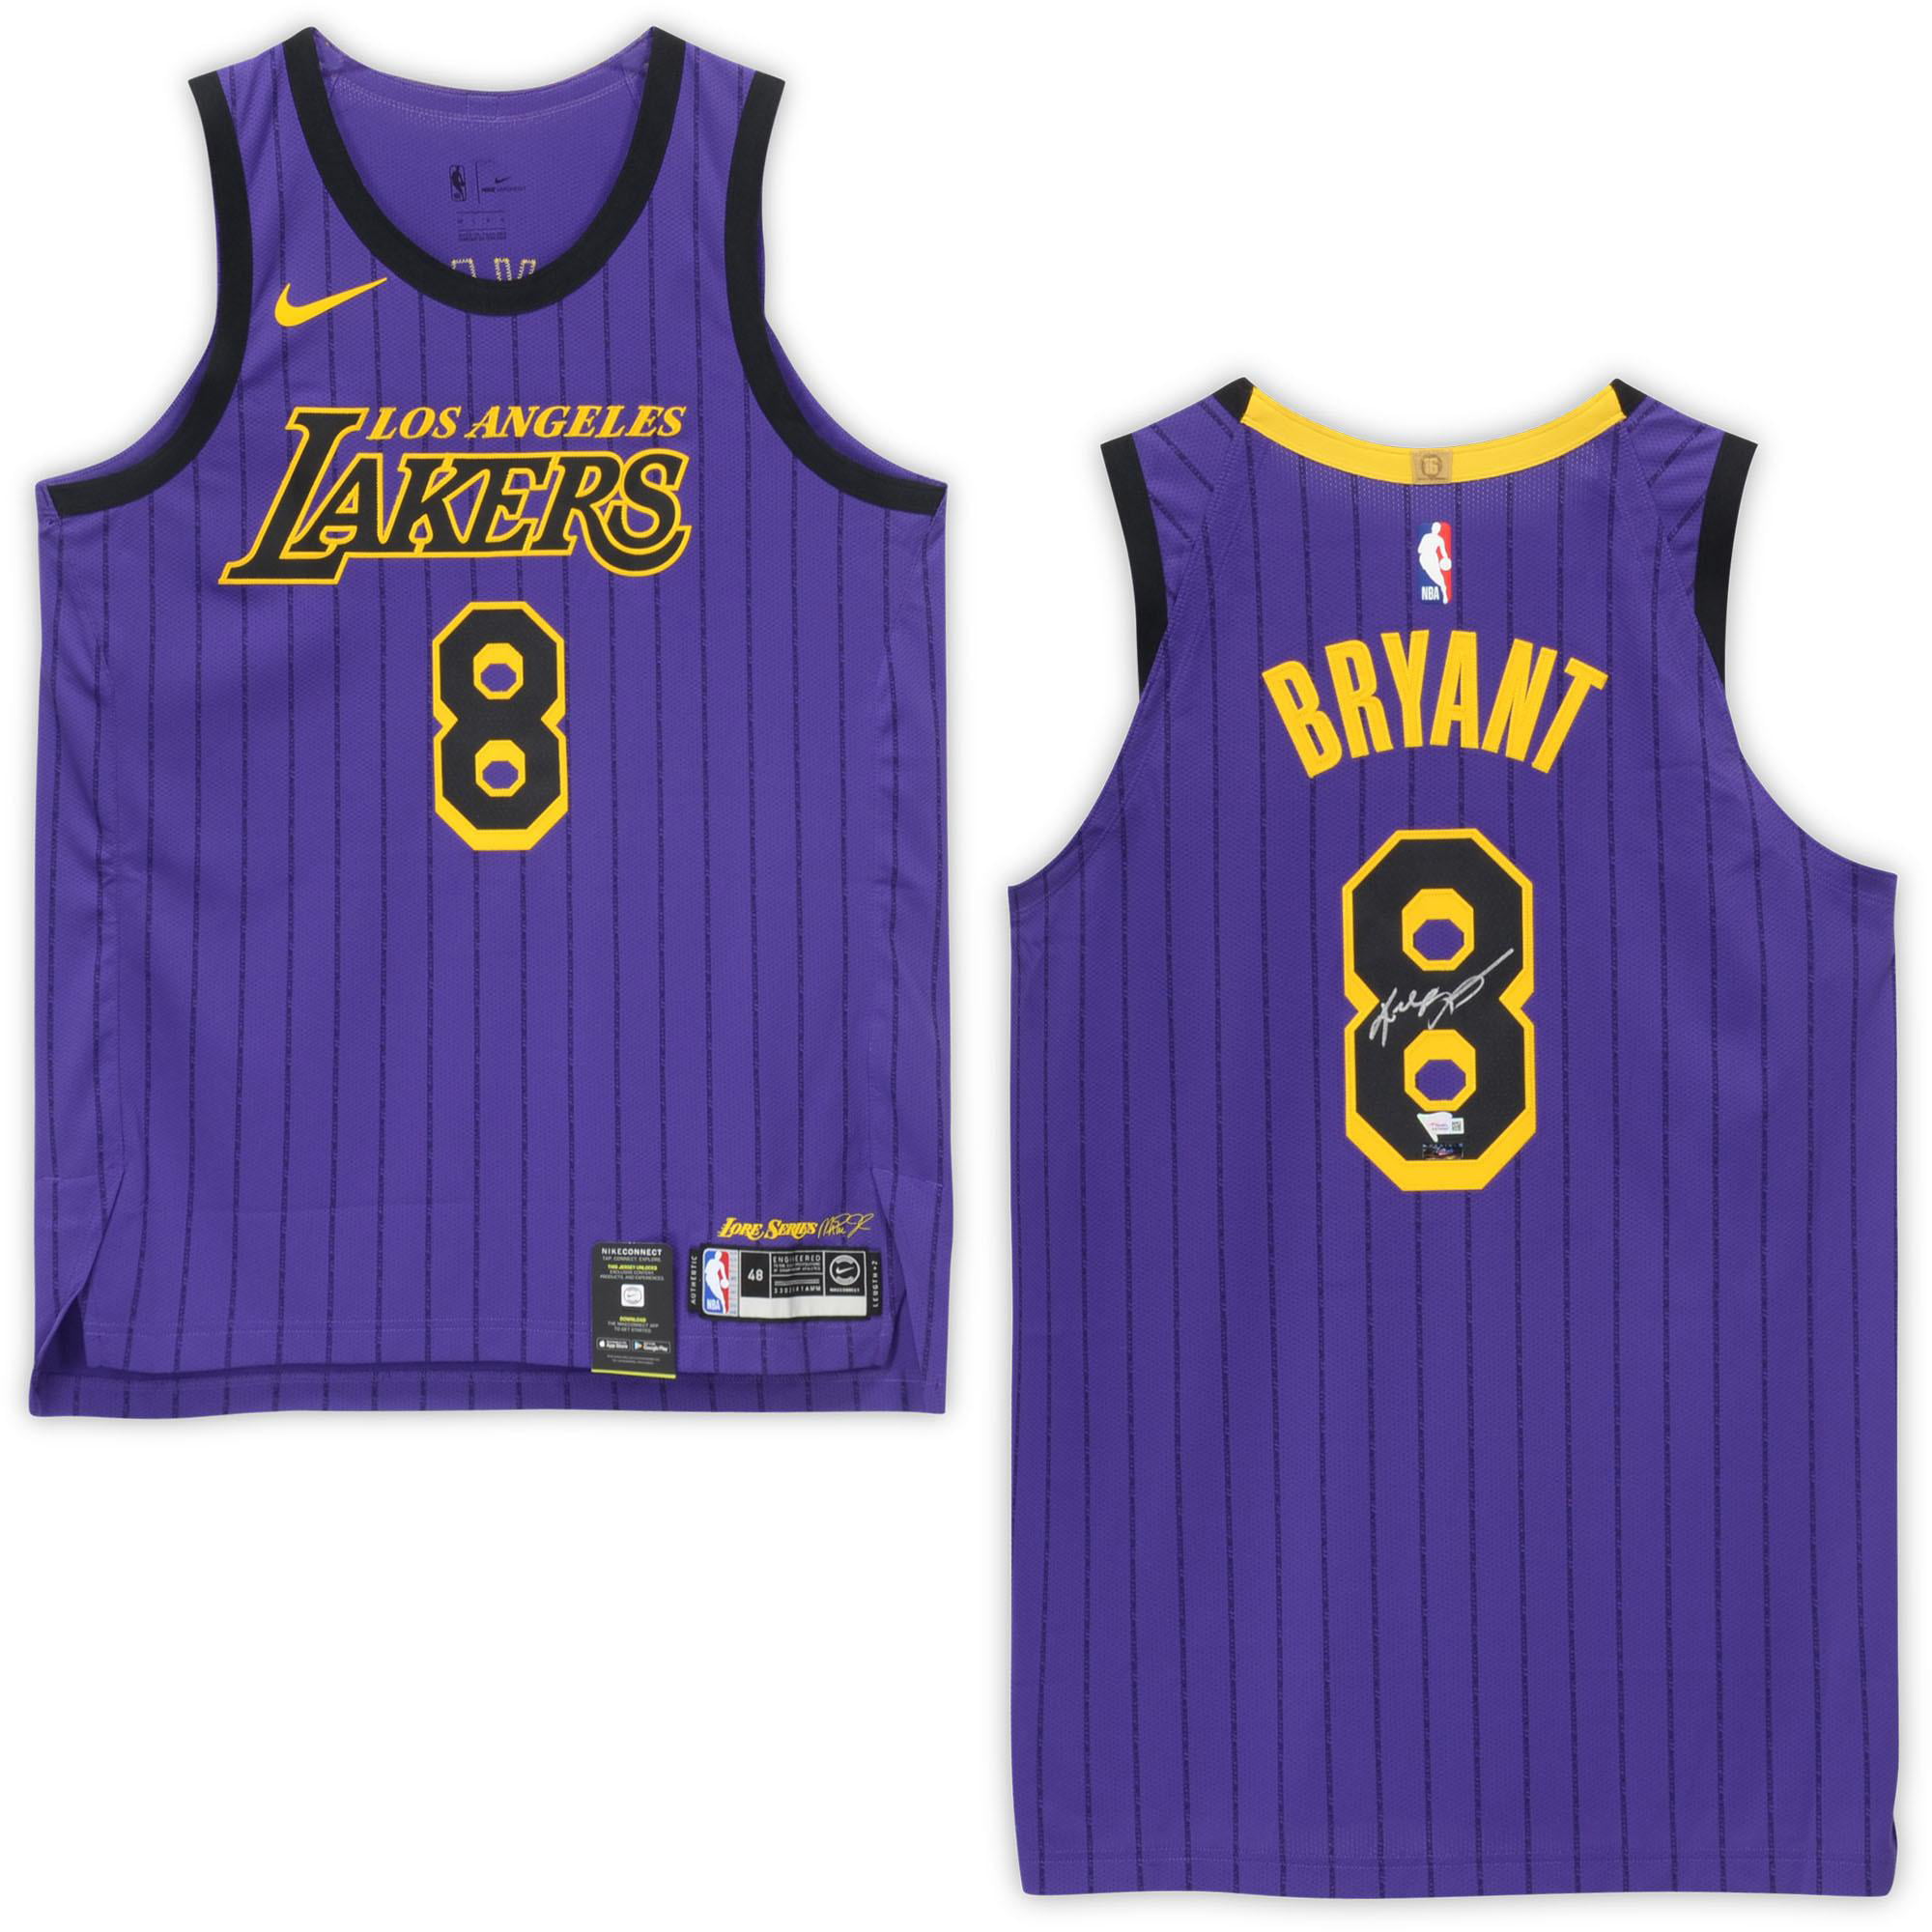 Kobe Bryant Los Angeles Lakers Autographed #8 City Edition Authentic Jersey - Panini Authentic - Fanatics Authentic Certified